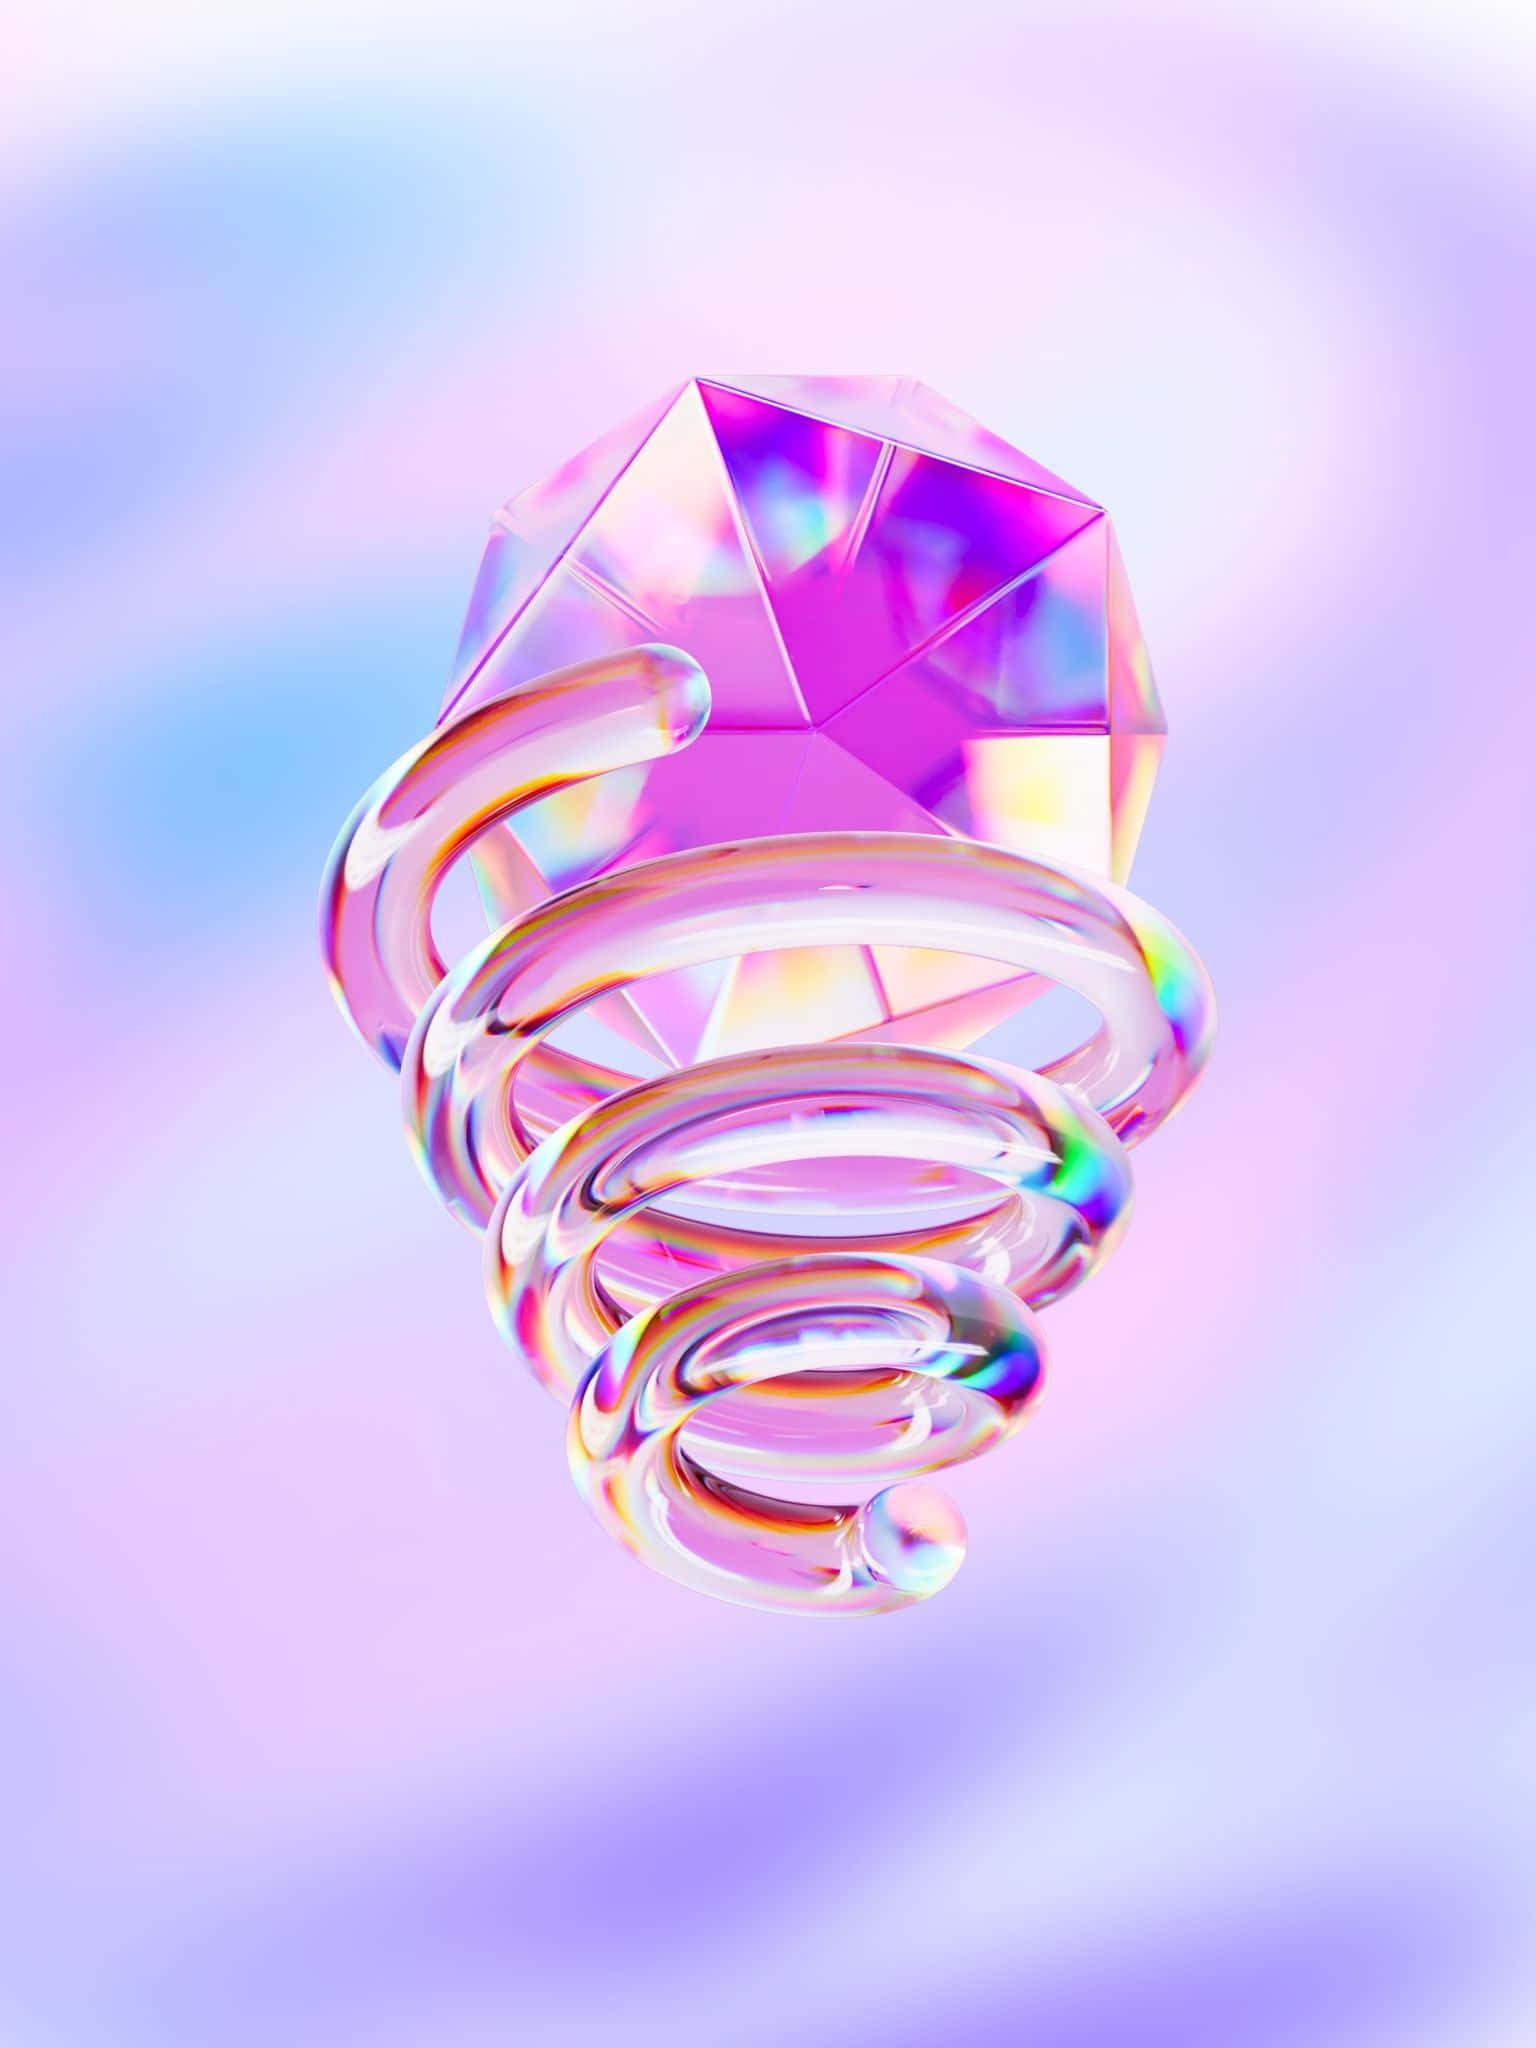 A Pink And Purple Spiral Ring On A Blue Background Background